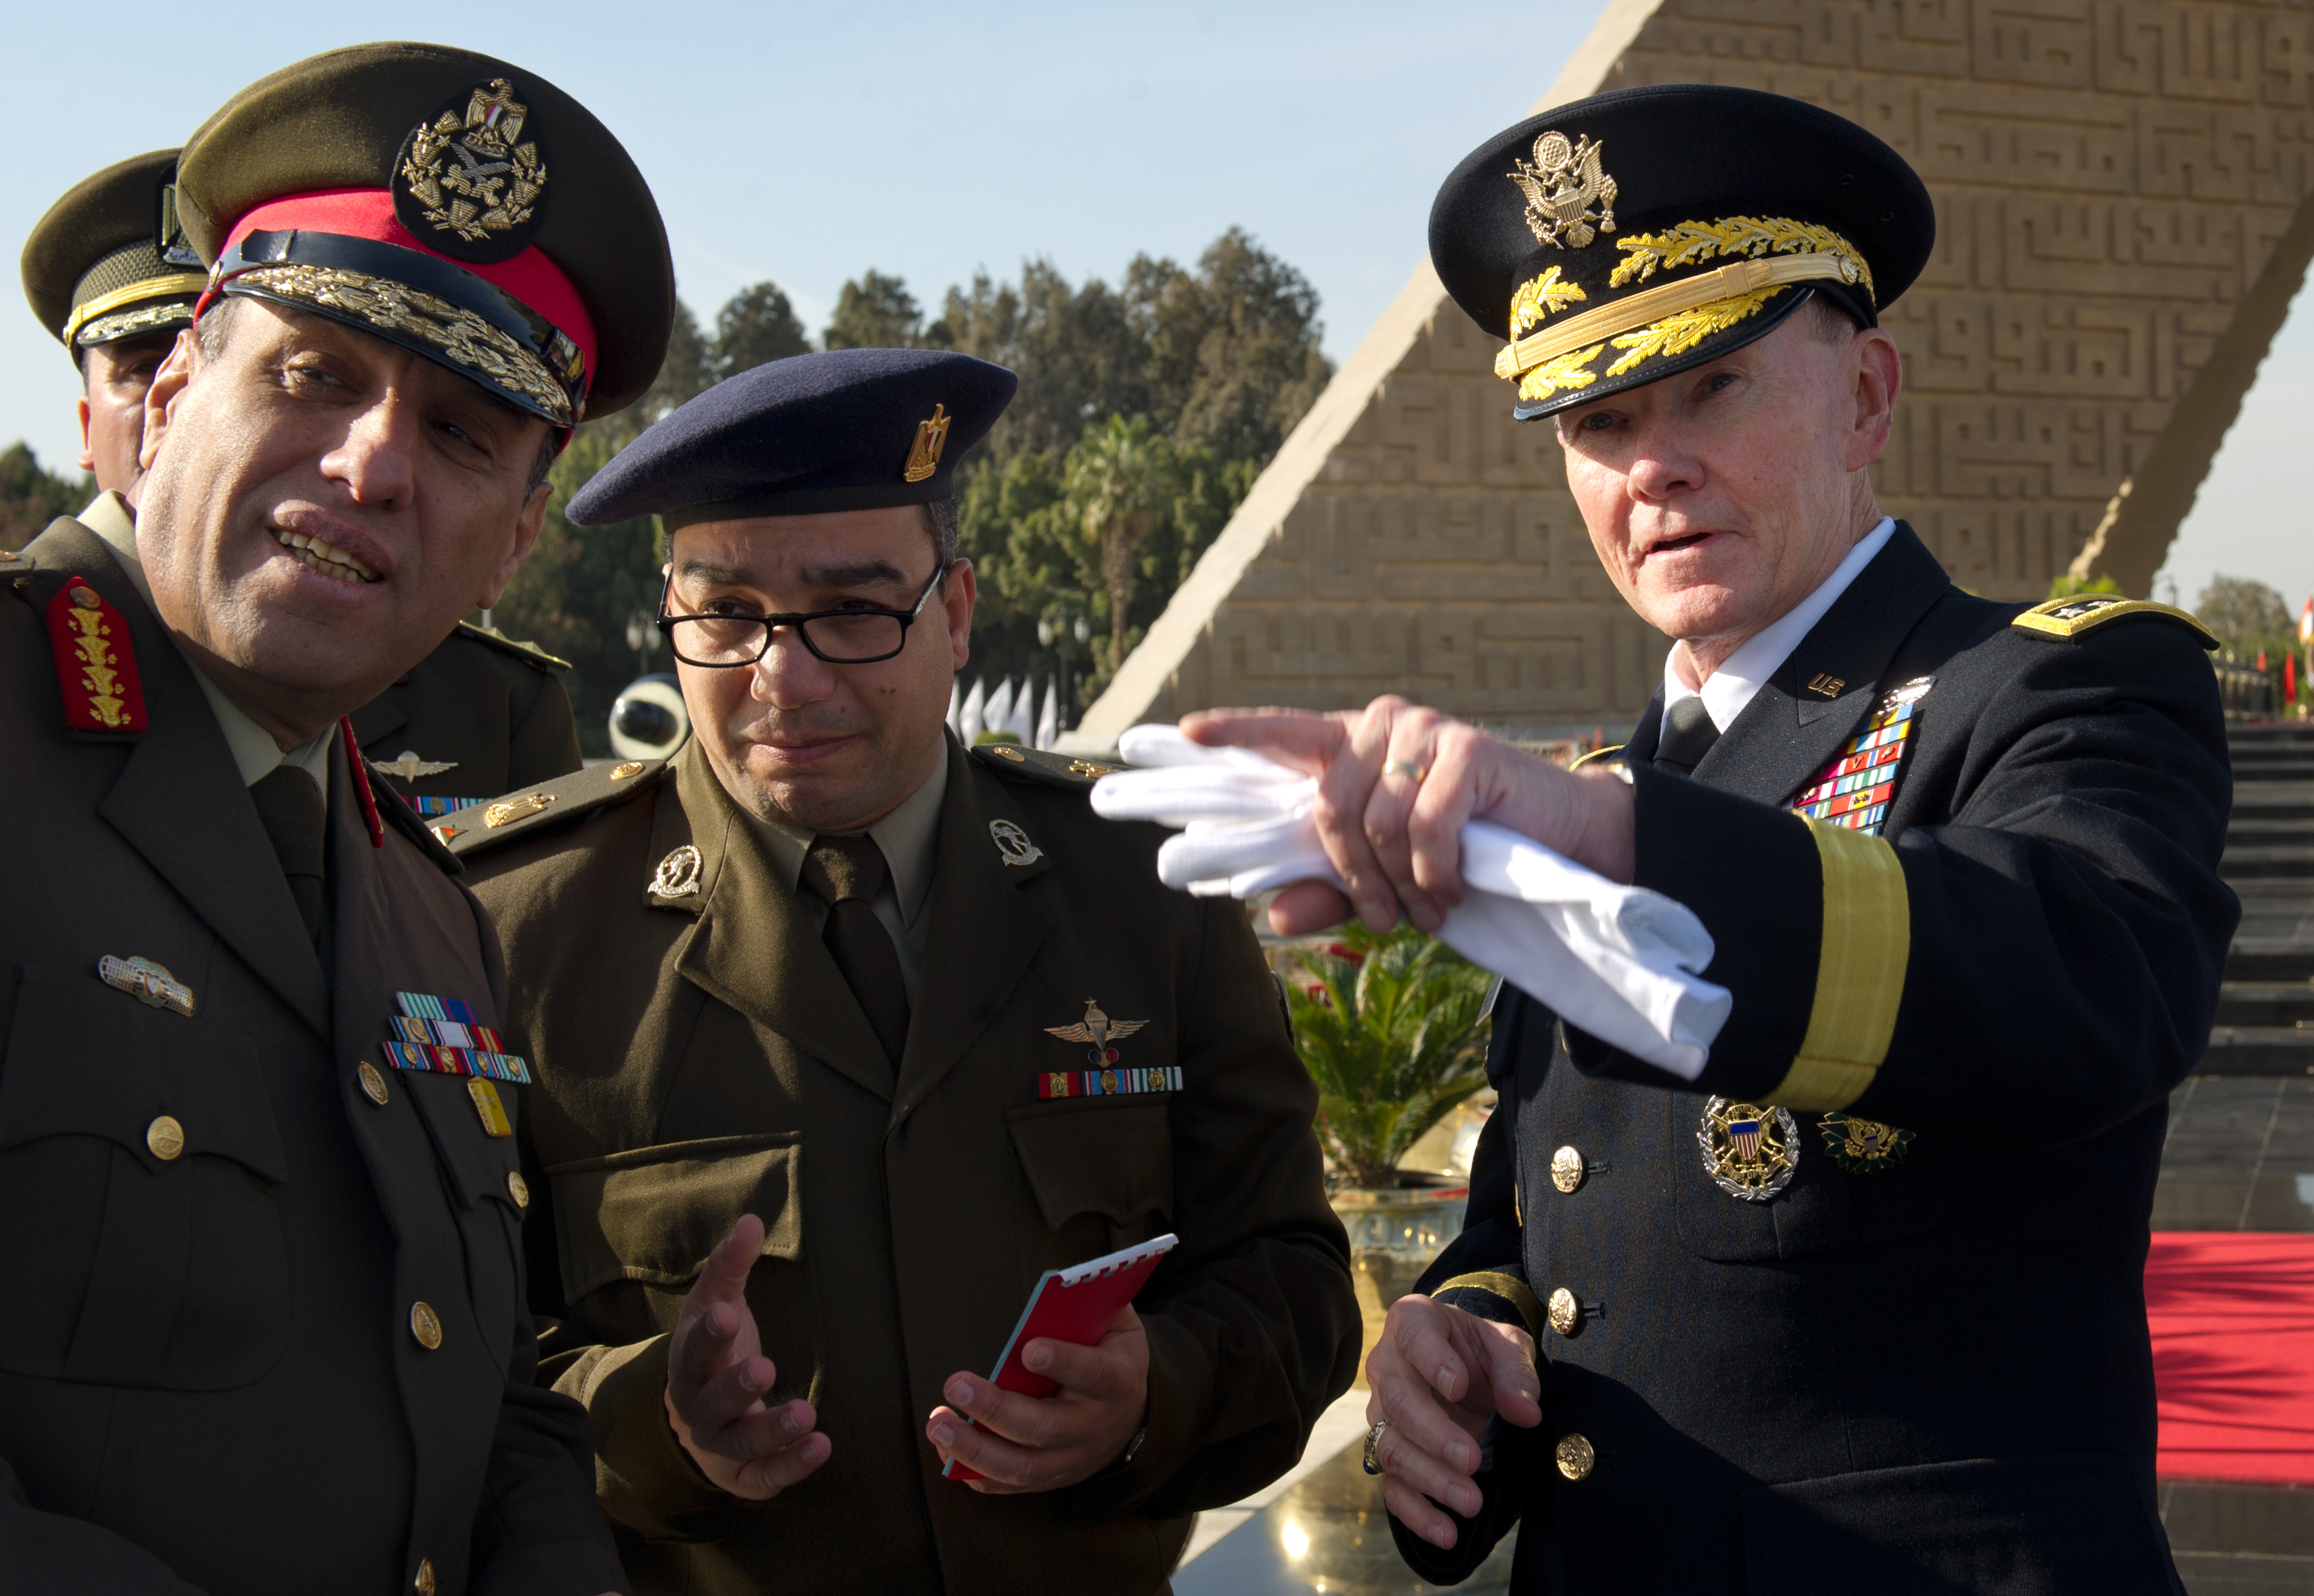 Chairman of the Joint Chiefs of Staff Gen. Martin E. Dempsey talks with senior Egyptian officers near the Egyptian Tomb of the Unknown Soldier and the tomb of President Anwar Sadat in Cairo, Egypt,  on Feb. 11, 2012.  DoD photo by D. Myles Cullen